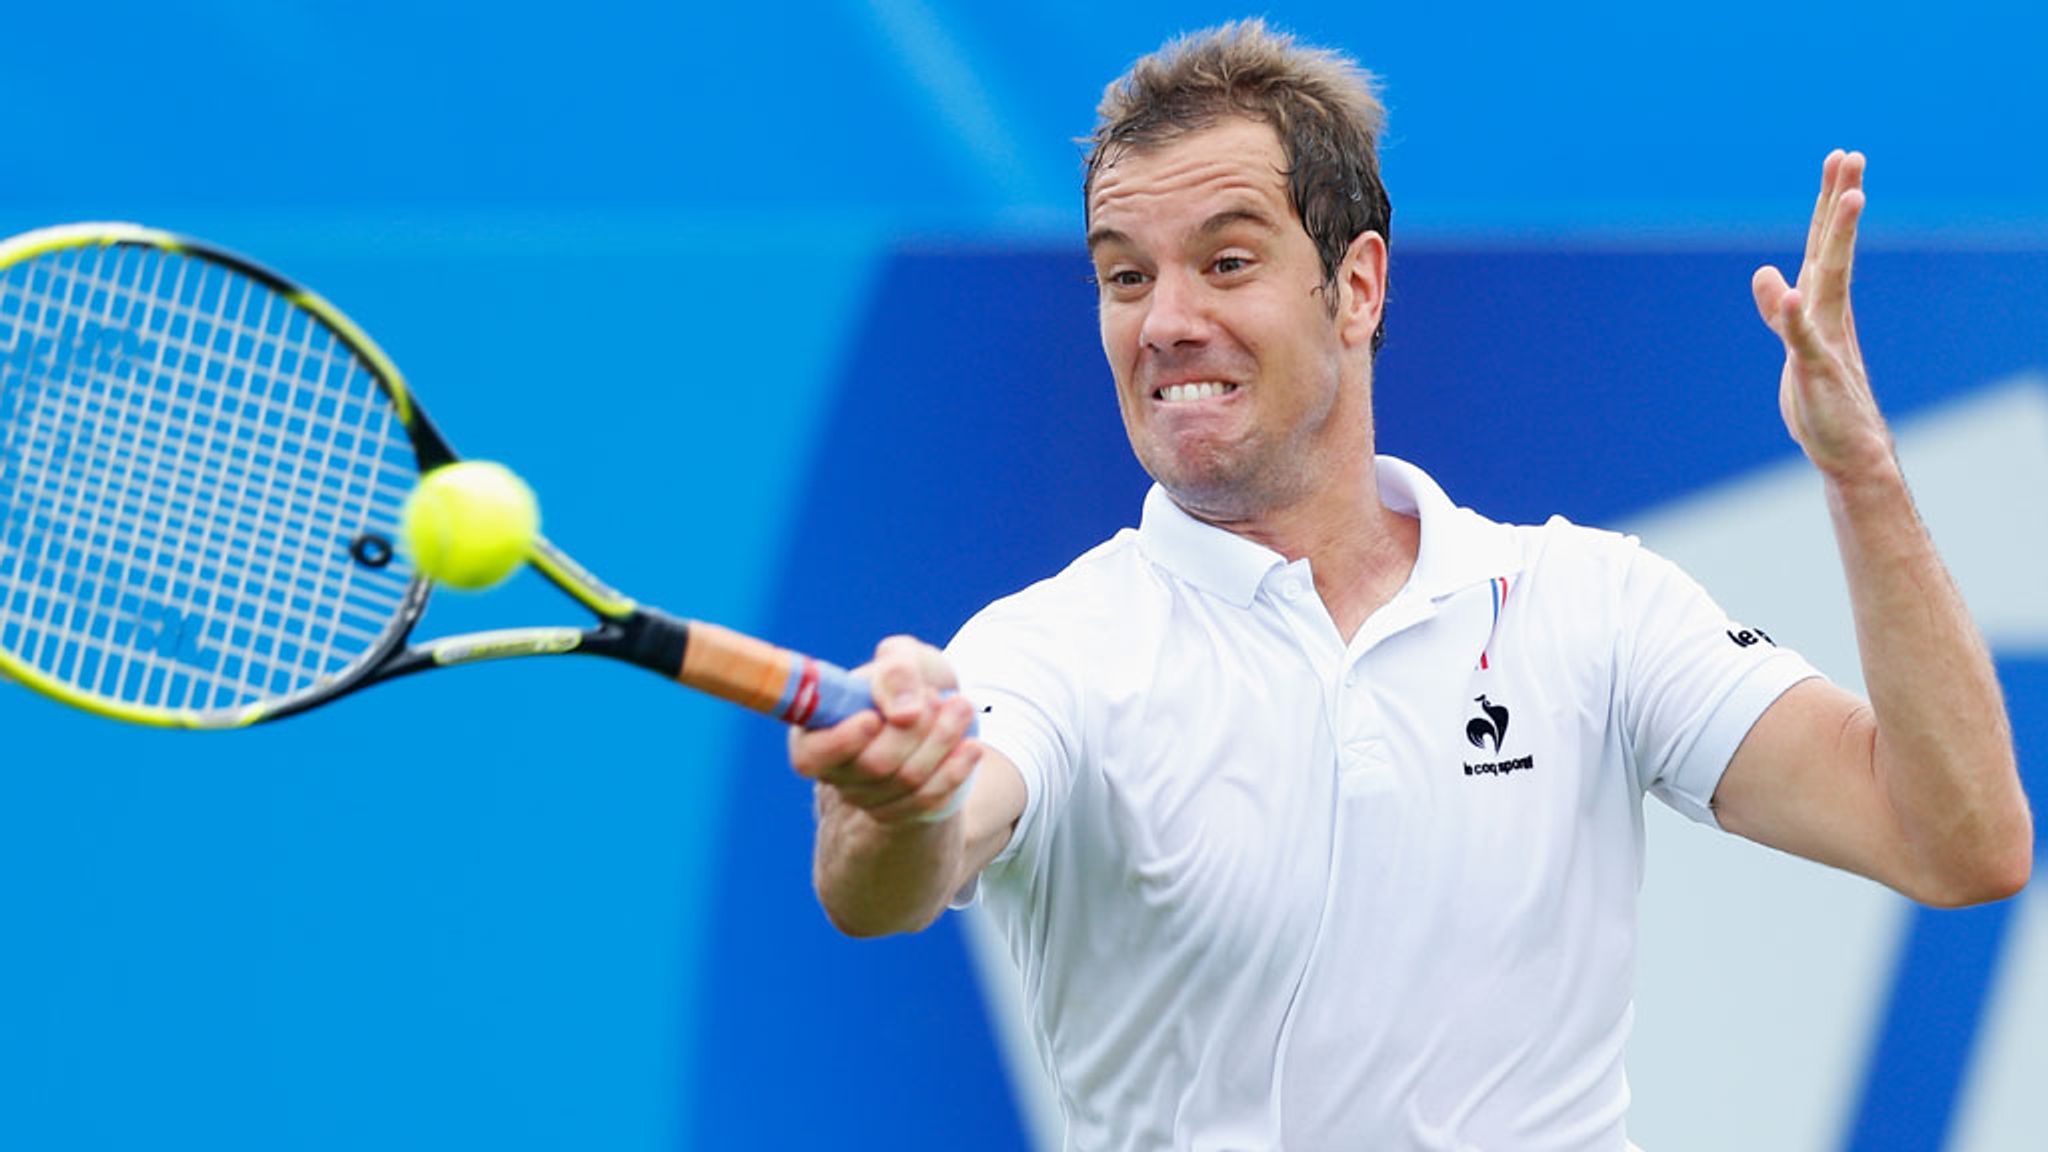 Eastbourne Top seed Richard Gasquet reaches last eight on his birthday Tennis News Sky Sports